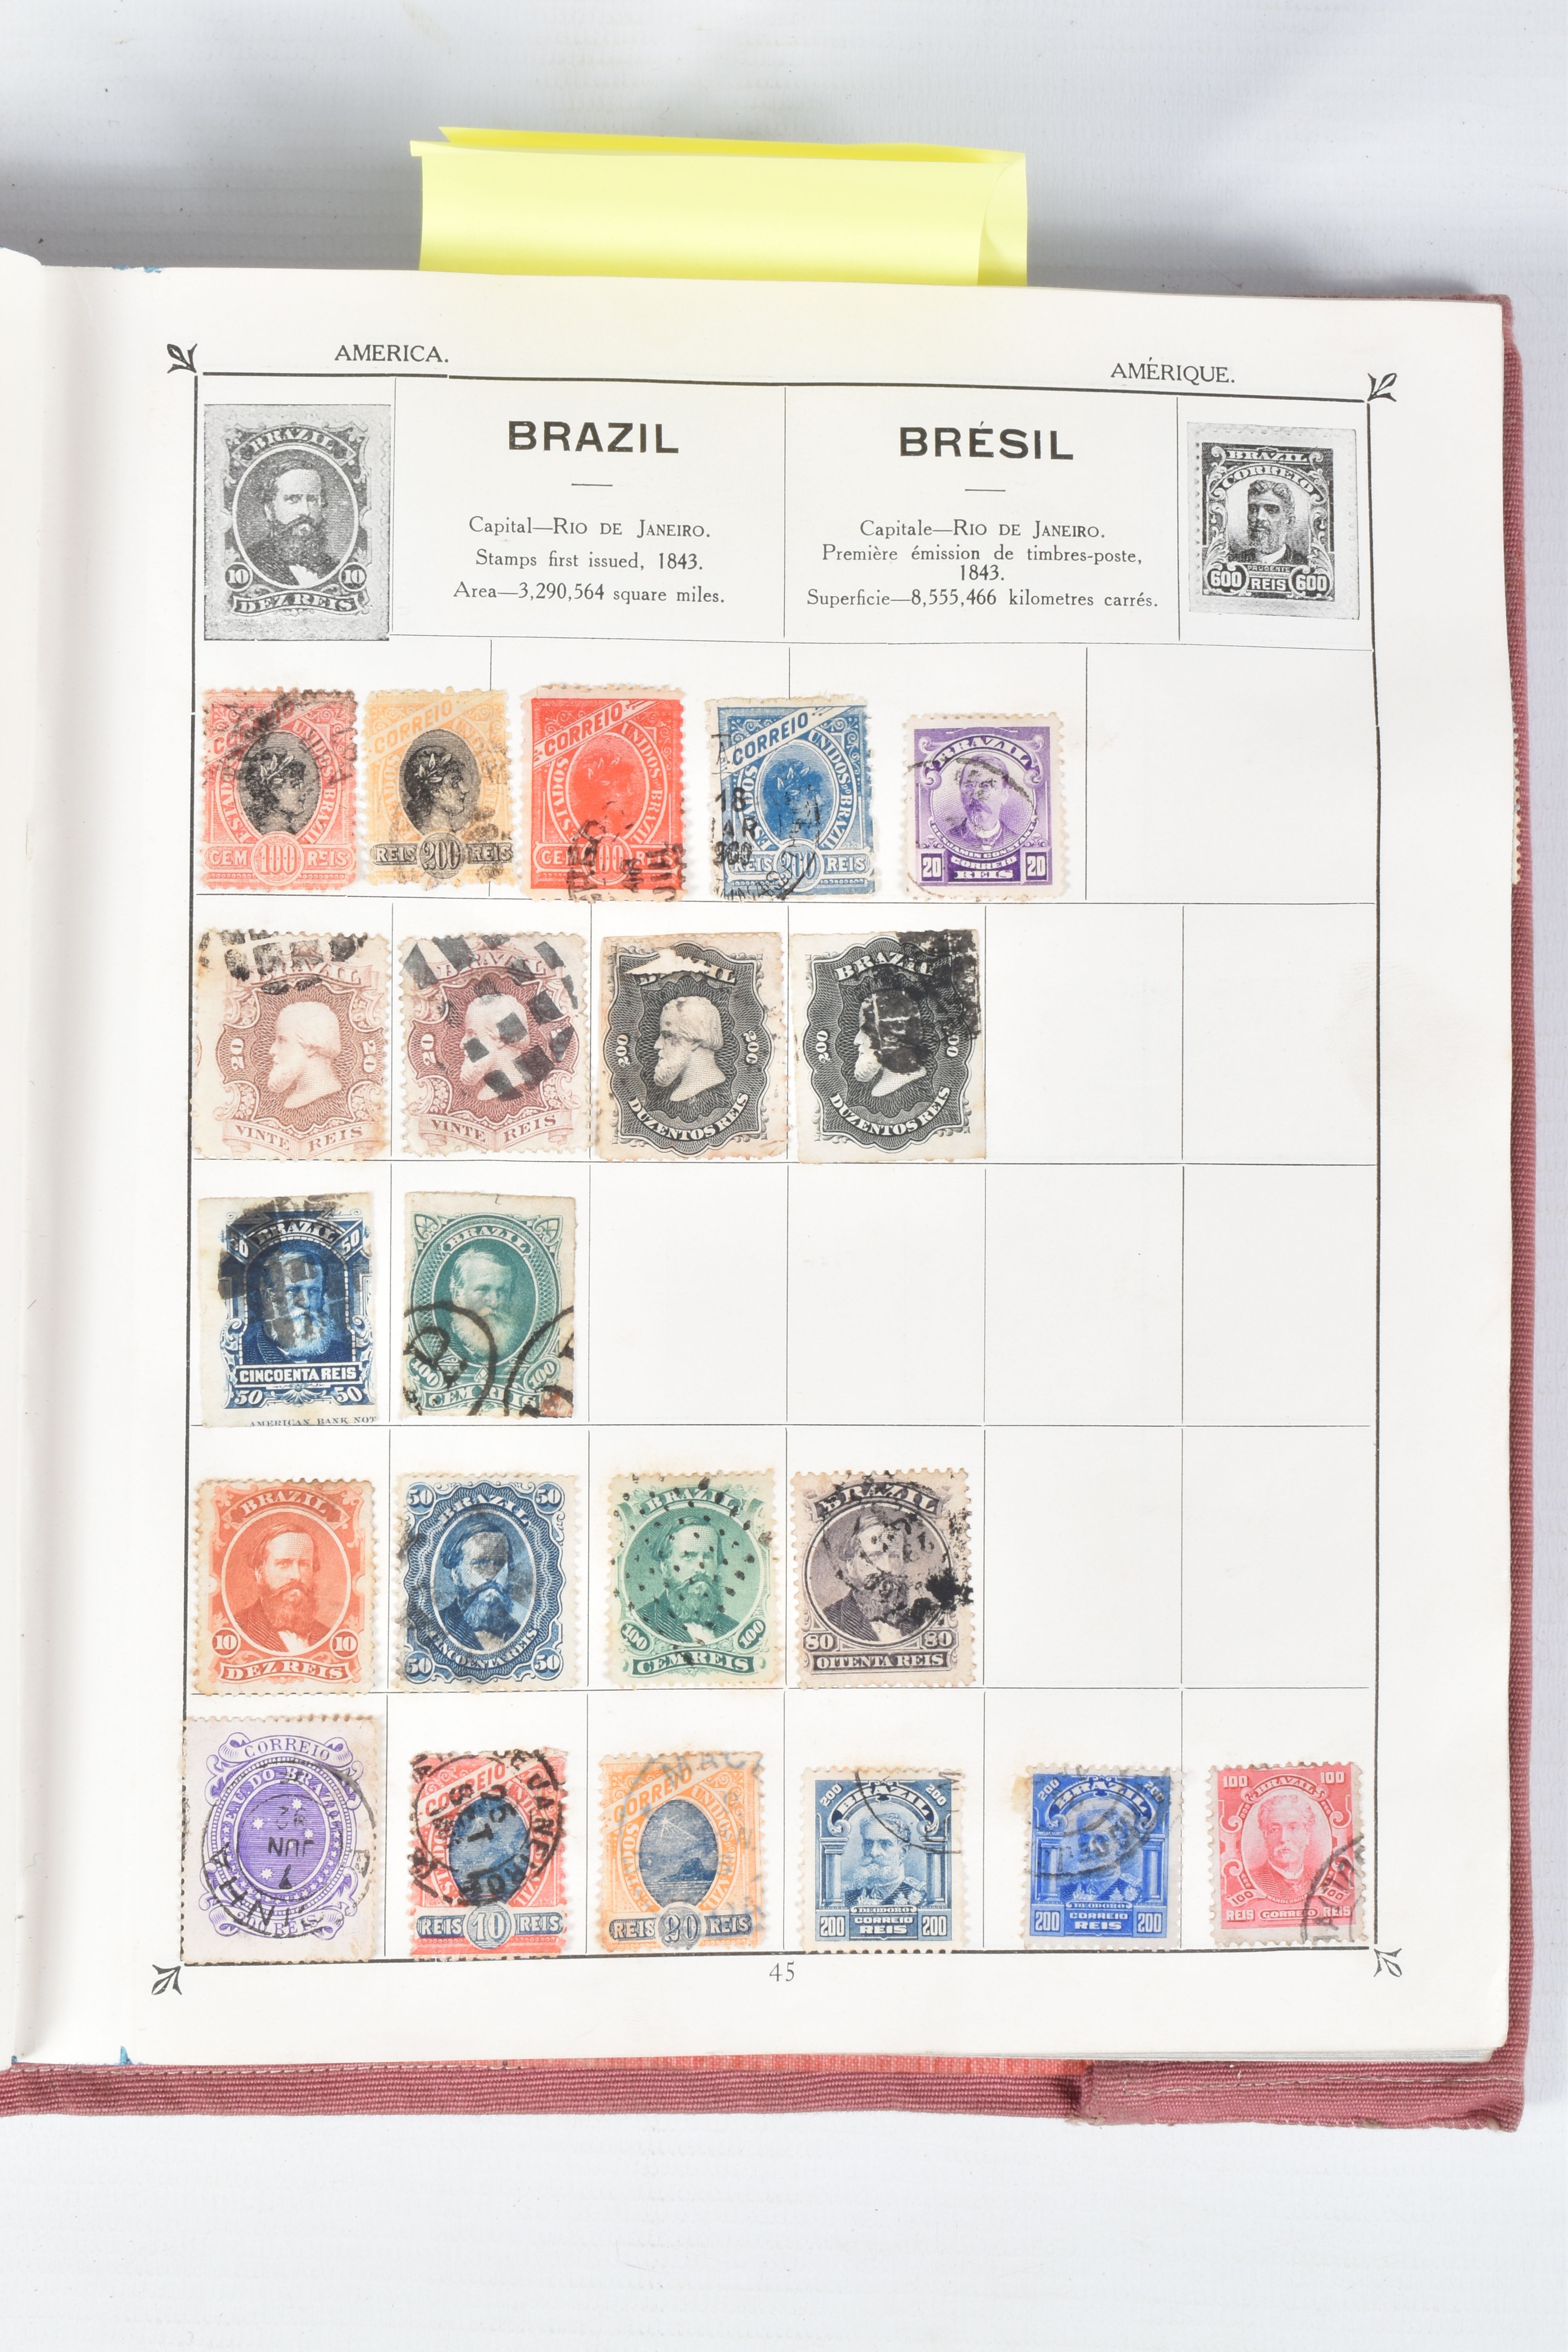 STAMP COLLECTION IN 2 SMALL CASES. We note 2 Strand type albums with multi-generation collectionm - Image 4 of 23